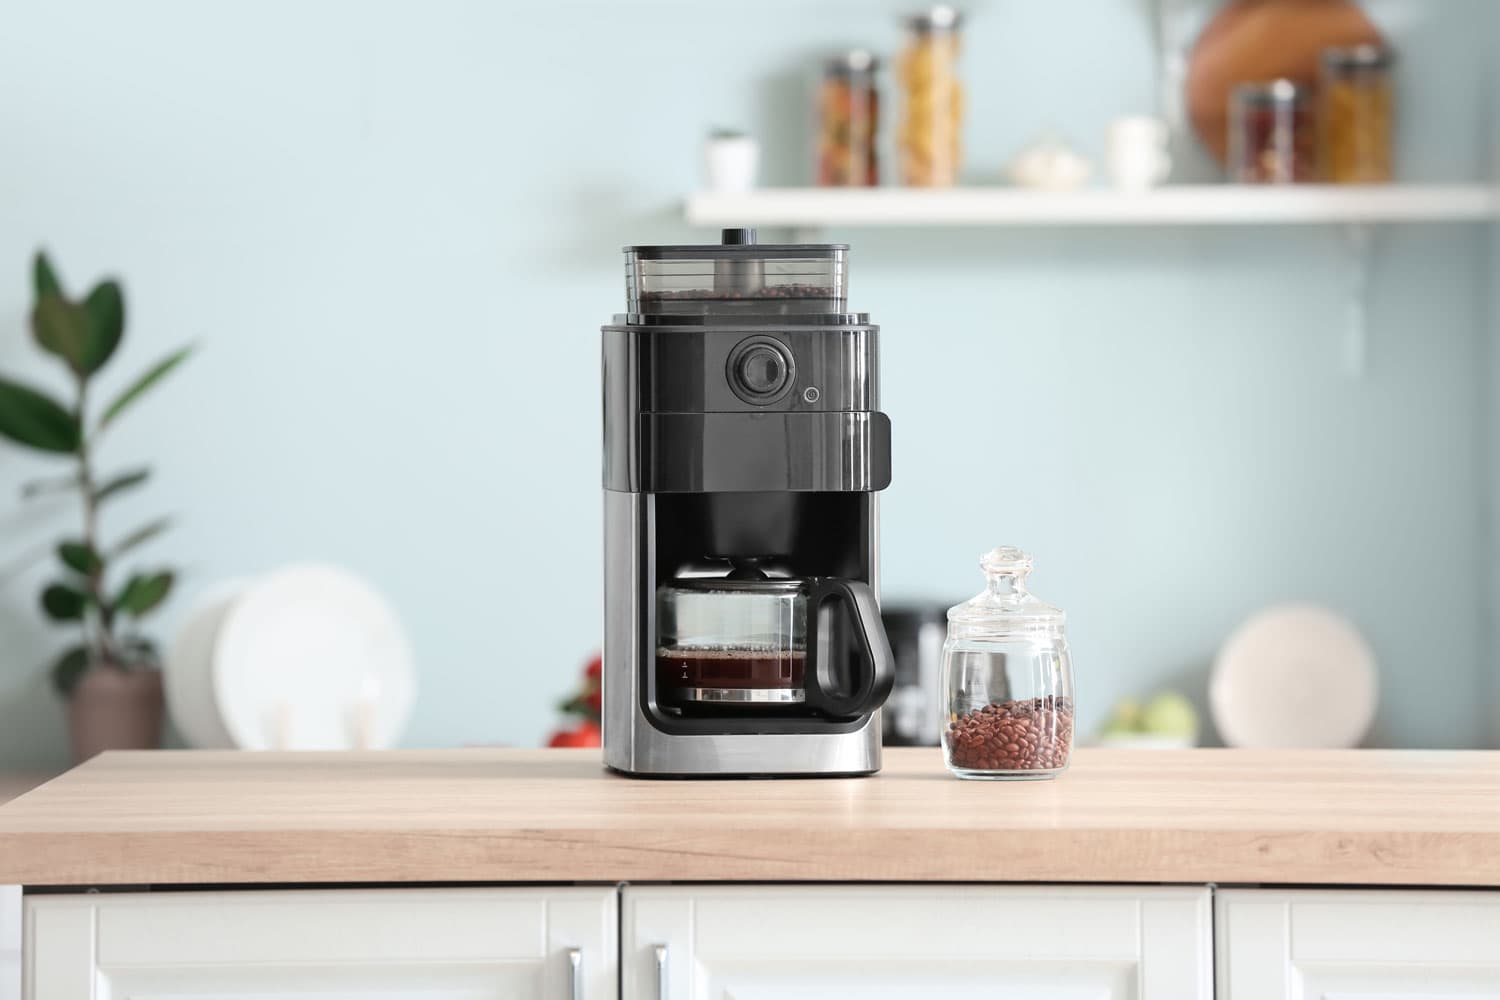 A coffee maker in the kitchen